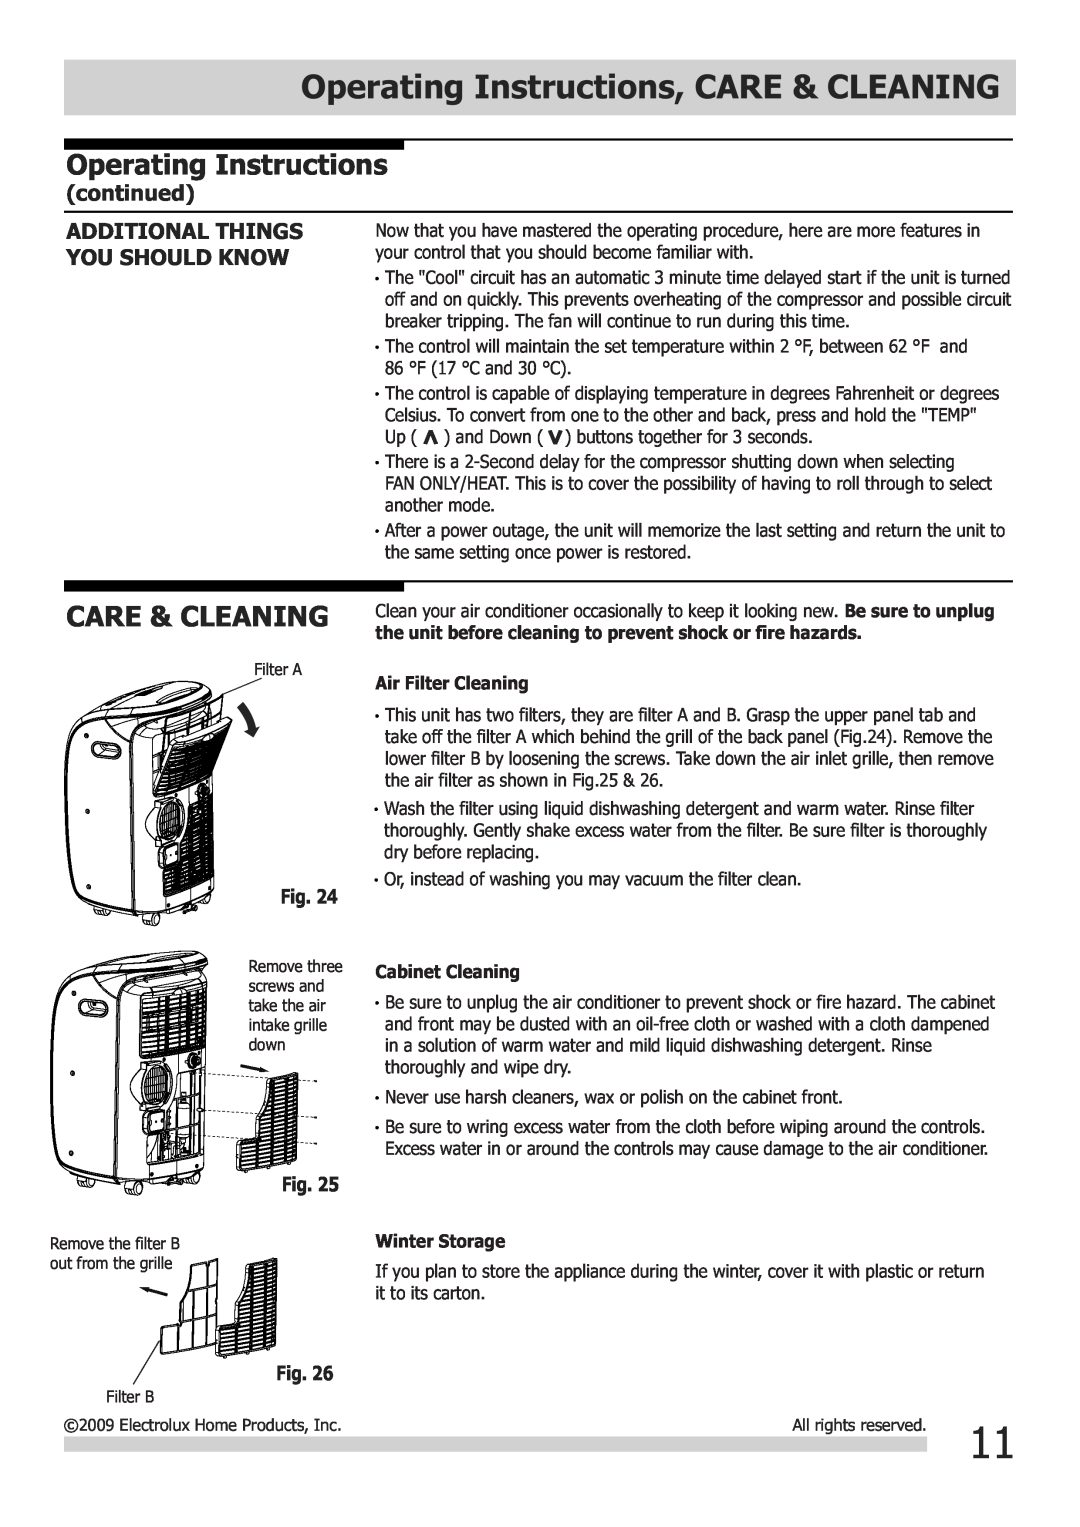 Frigidaire FGHD2472PF Operating Instructions, CARE & CLEANING, Care & Cleaning, Additional Things, You Should Know 